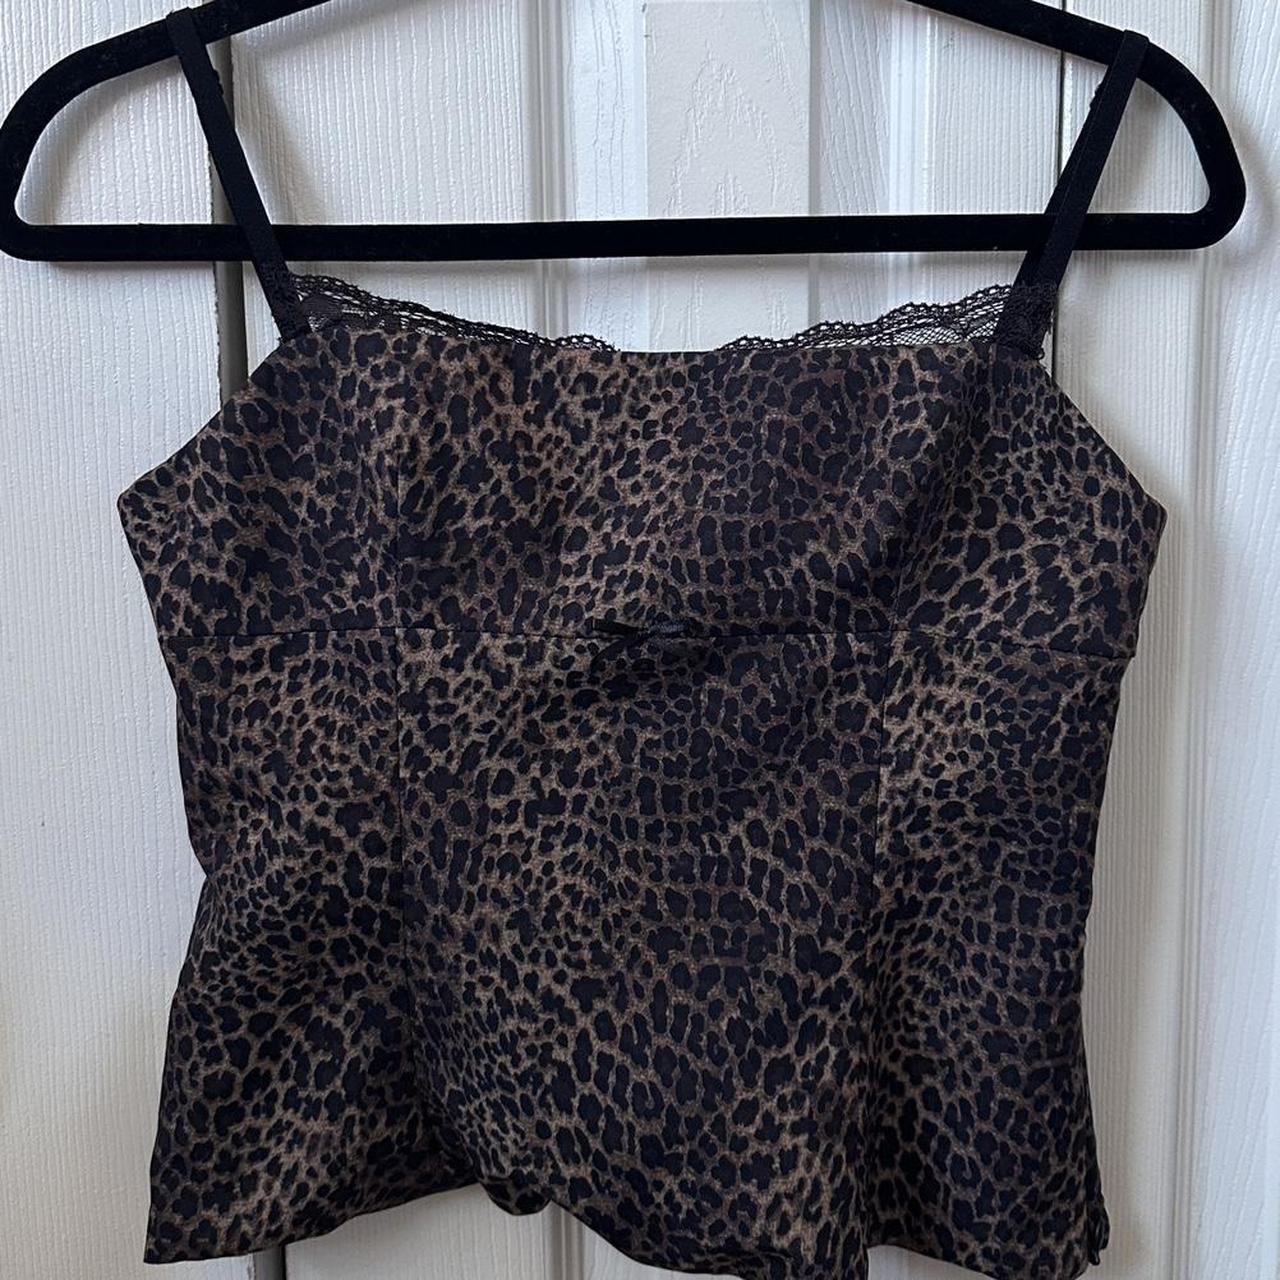 ZARA LEOPARD CAMI TOP🤎 This is the most adorable... - Depop